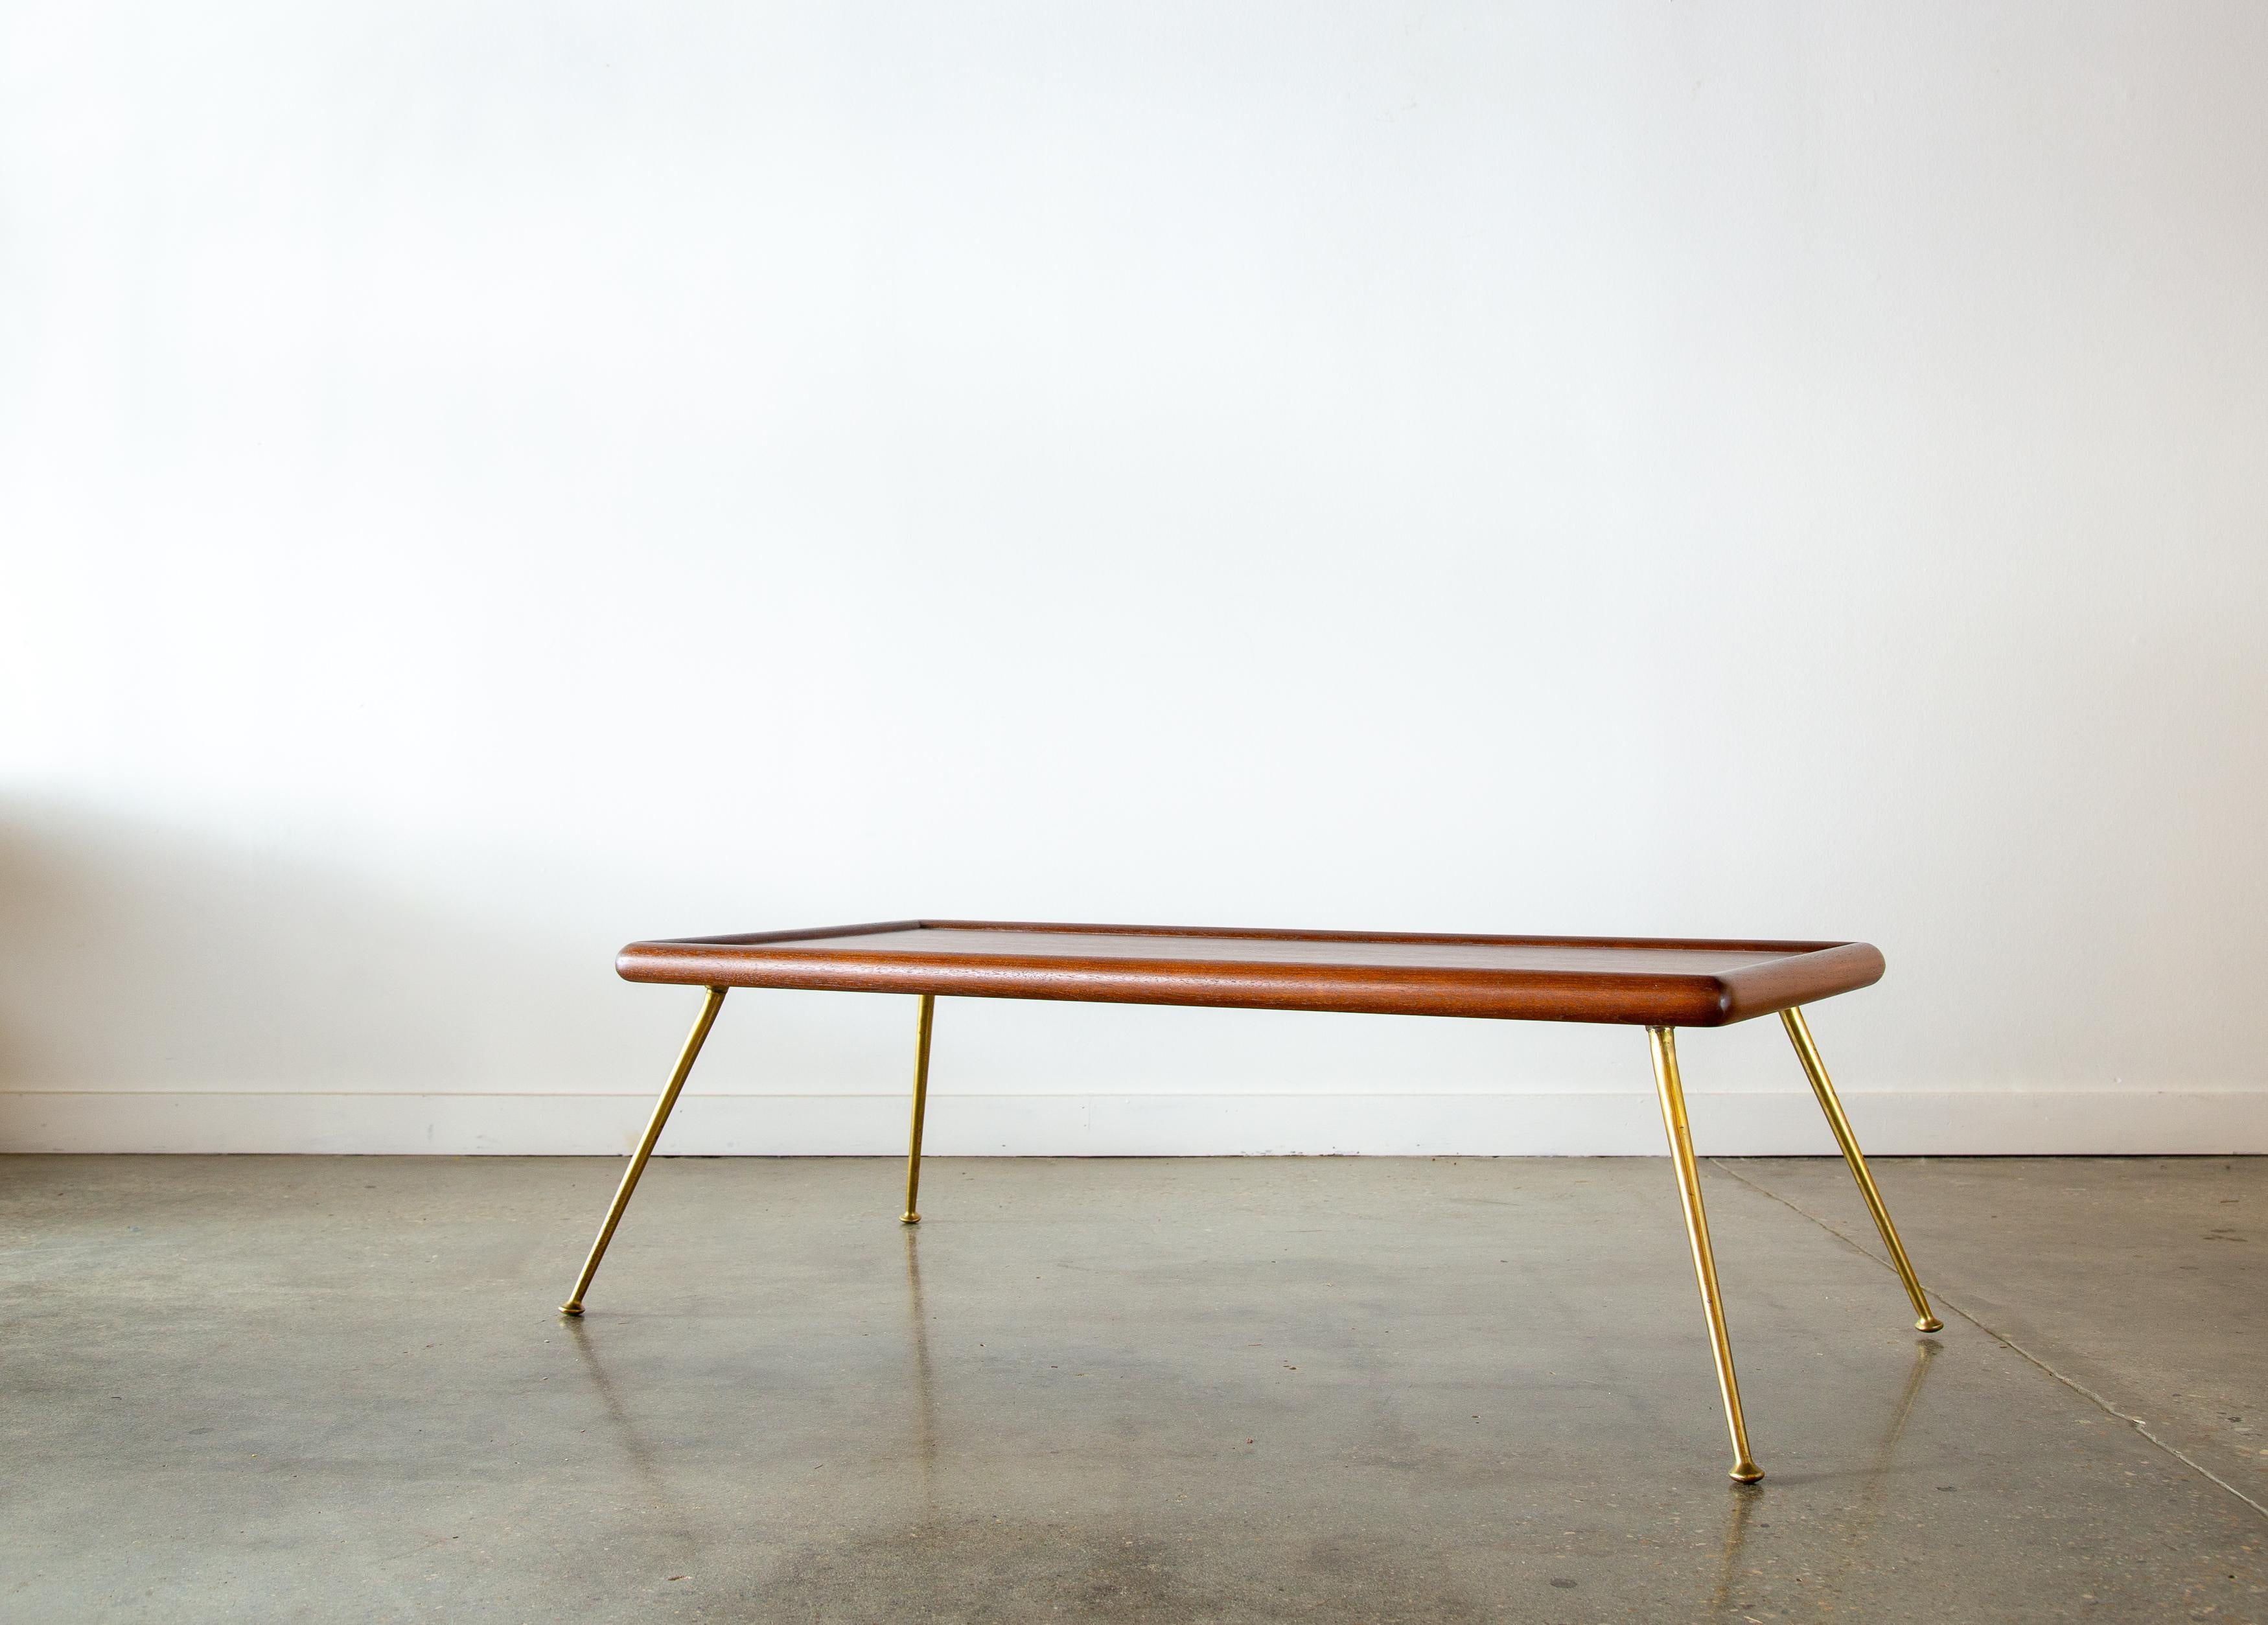 An iconic T.H. Robsjohn Gibbings for Widdicomb brass leg coffee table or bench.  A slab of mahogany floats on splayed brass legs. Exaggerated bull nose edge, with a raised lip around the circumference.  This table with distinct New York vibe works